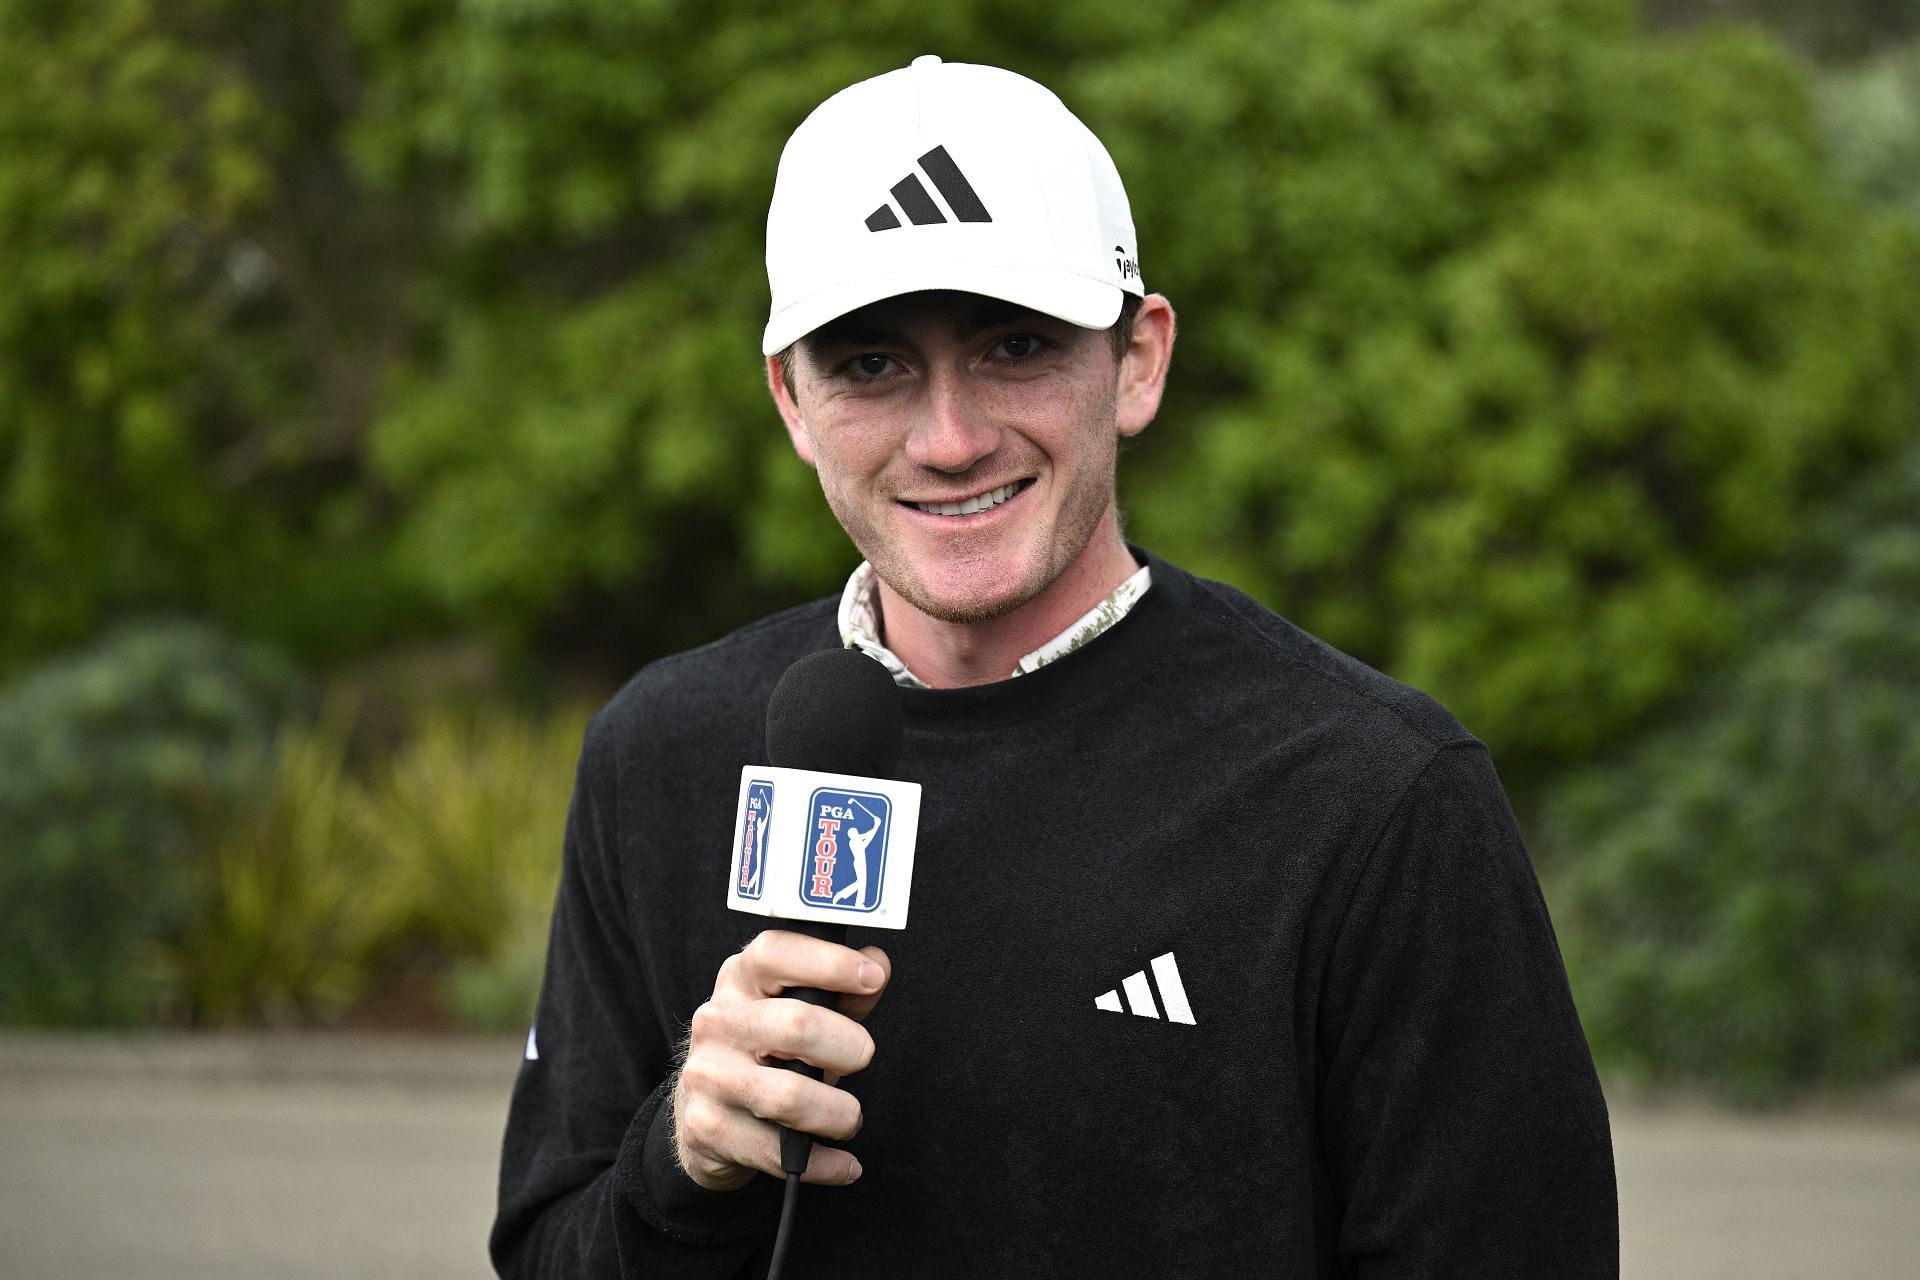 AT&amp;T Pebble Beach Pro-Am - Previews